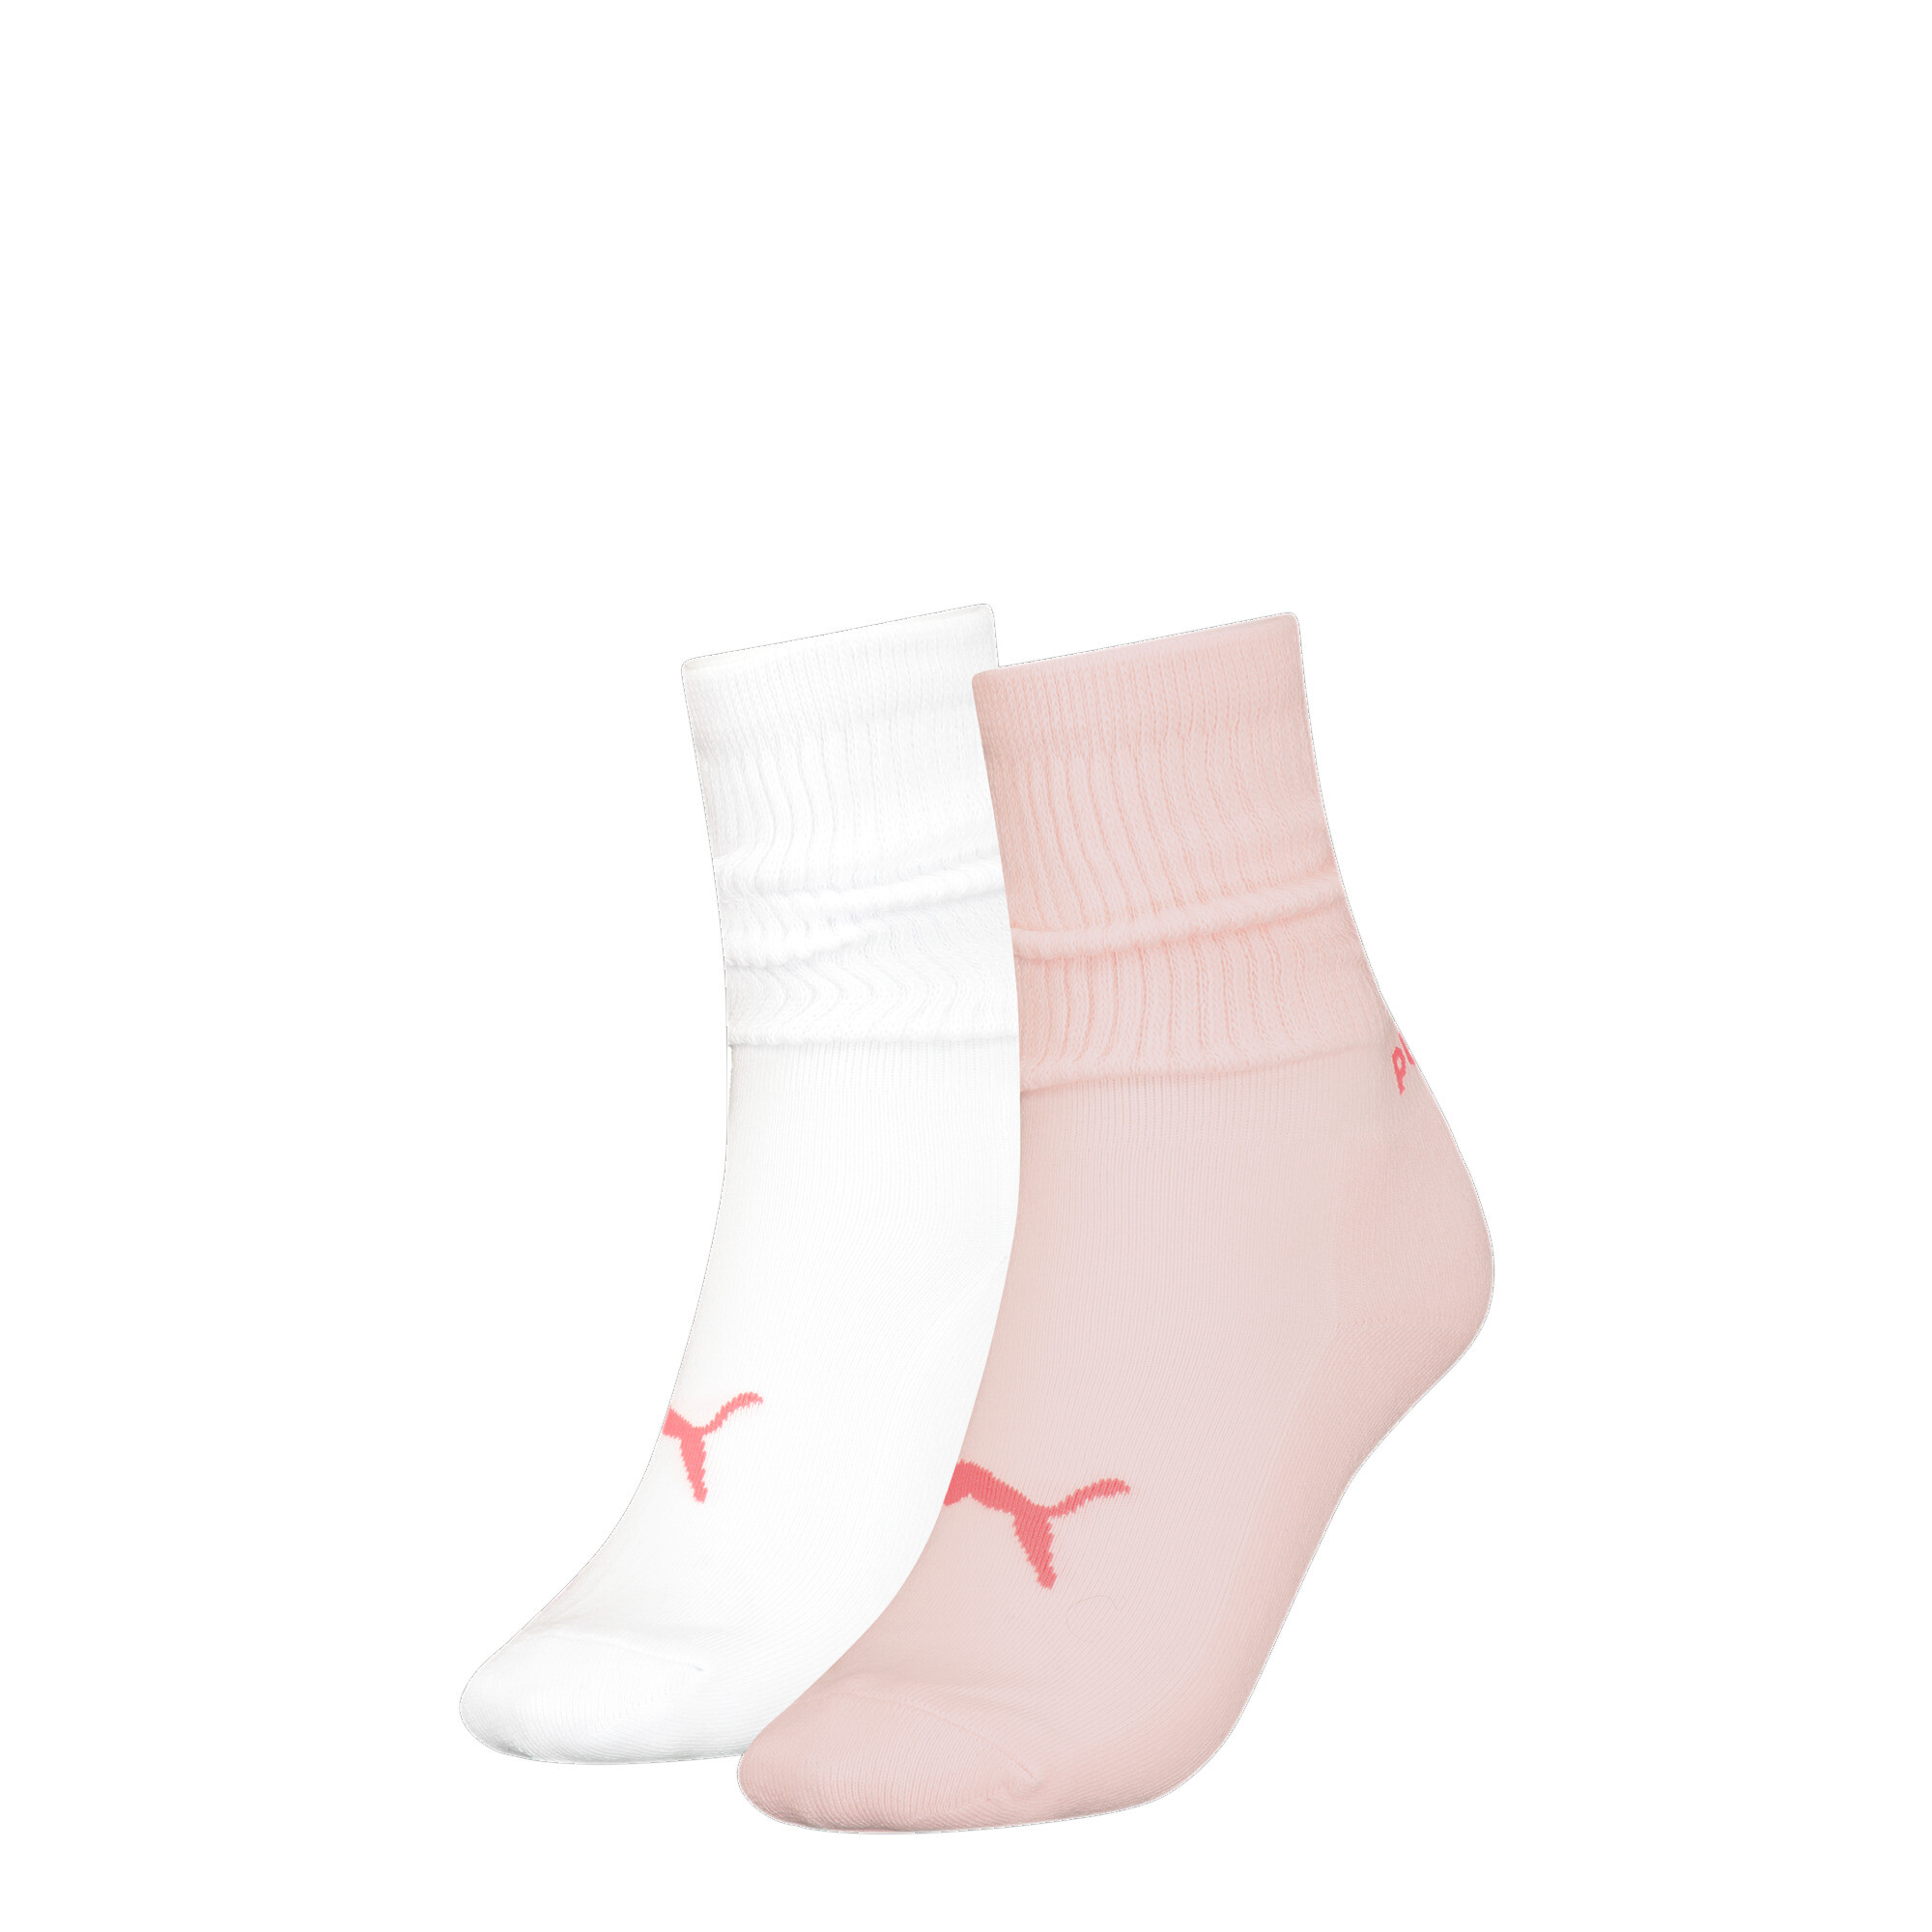 Women's PUMA Slouch Crew Socks 2 Pack In 70 - Pink, Size 35-38